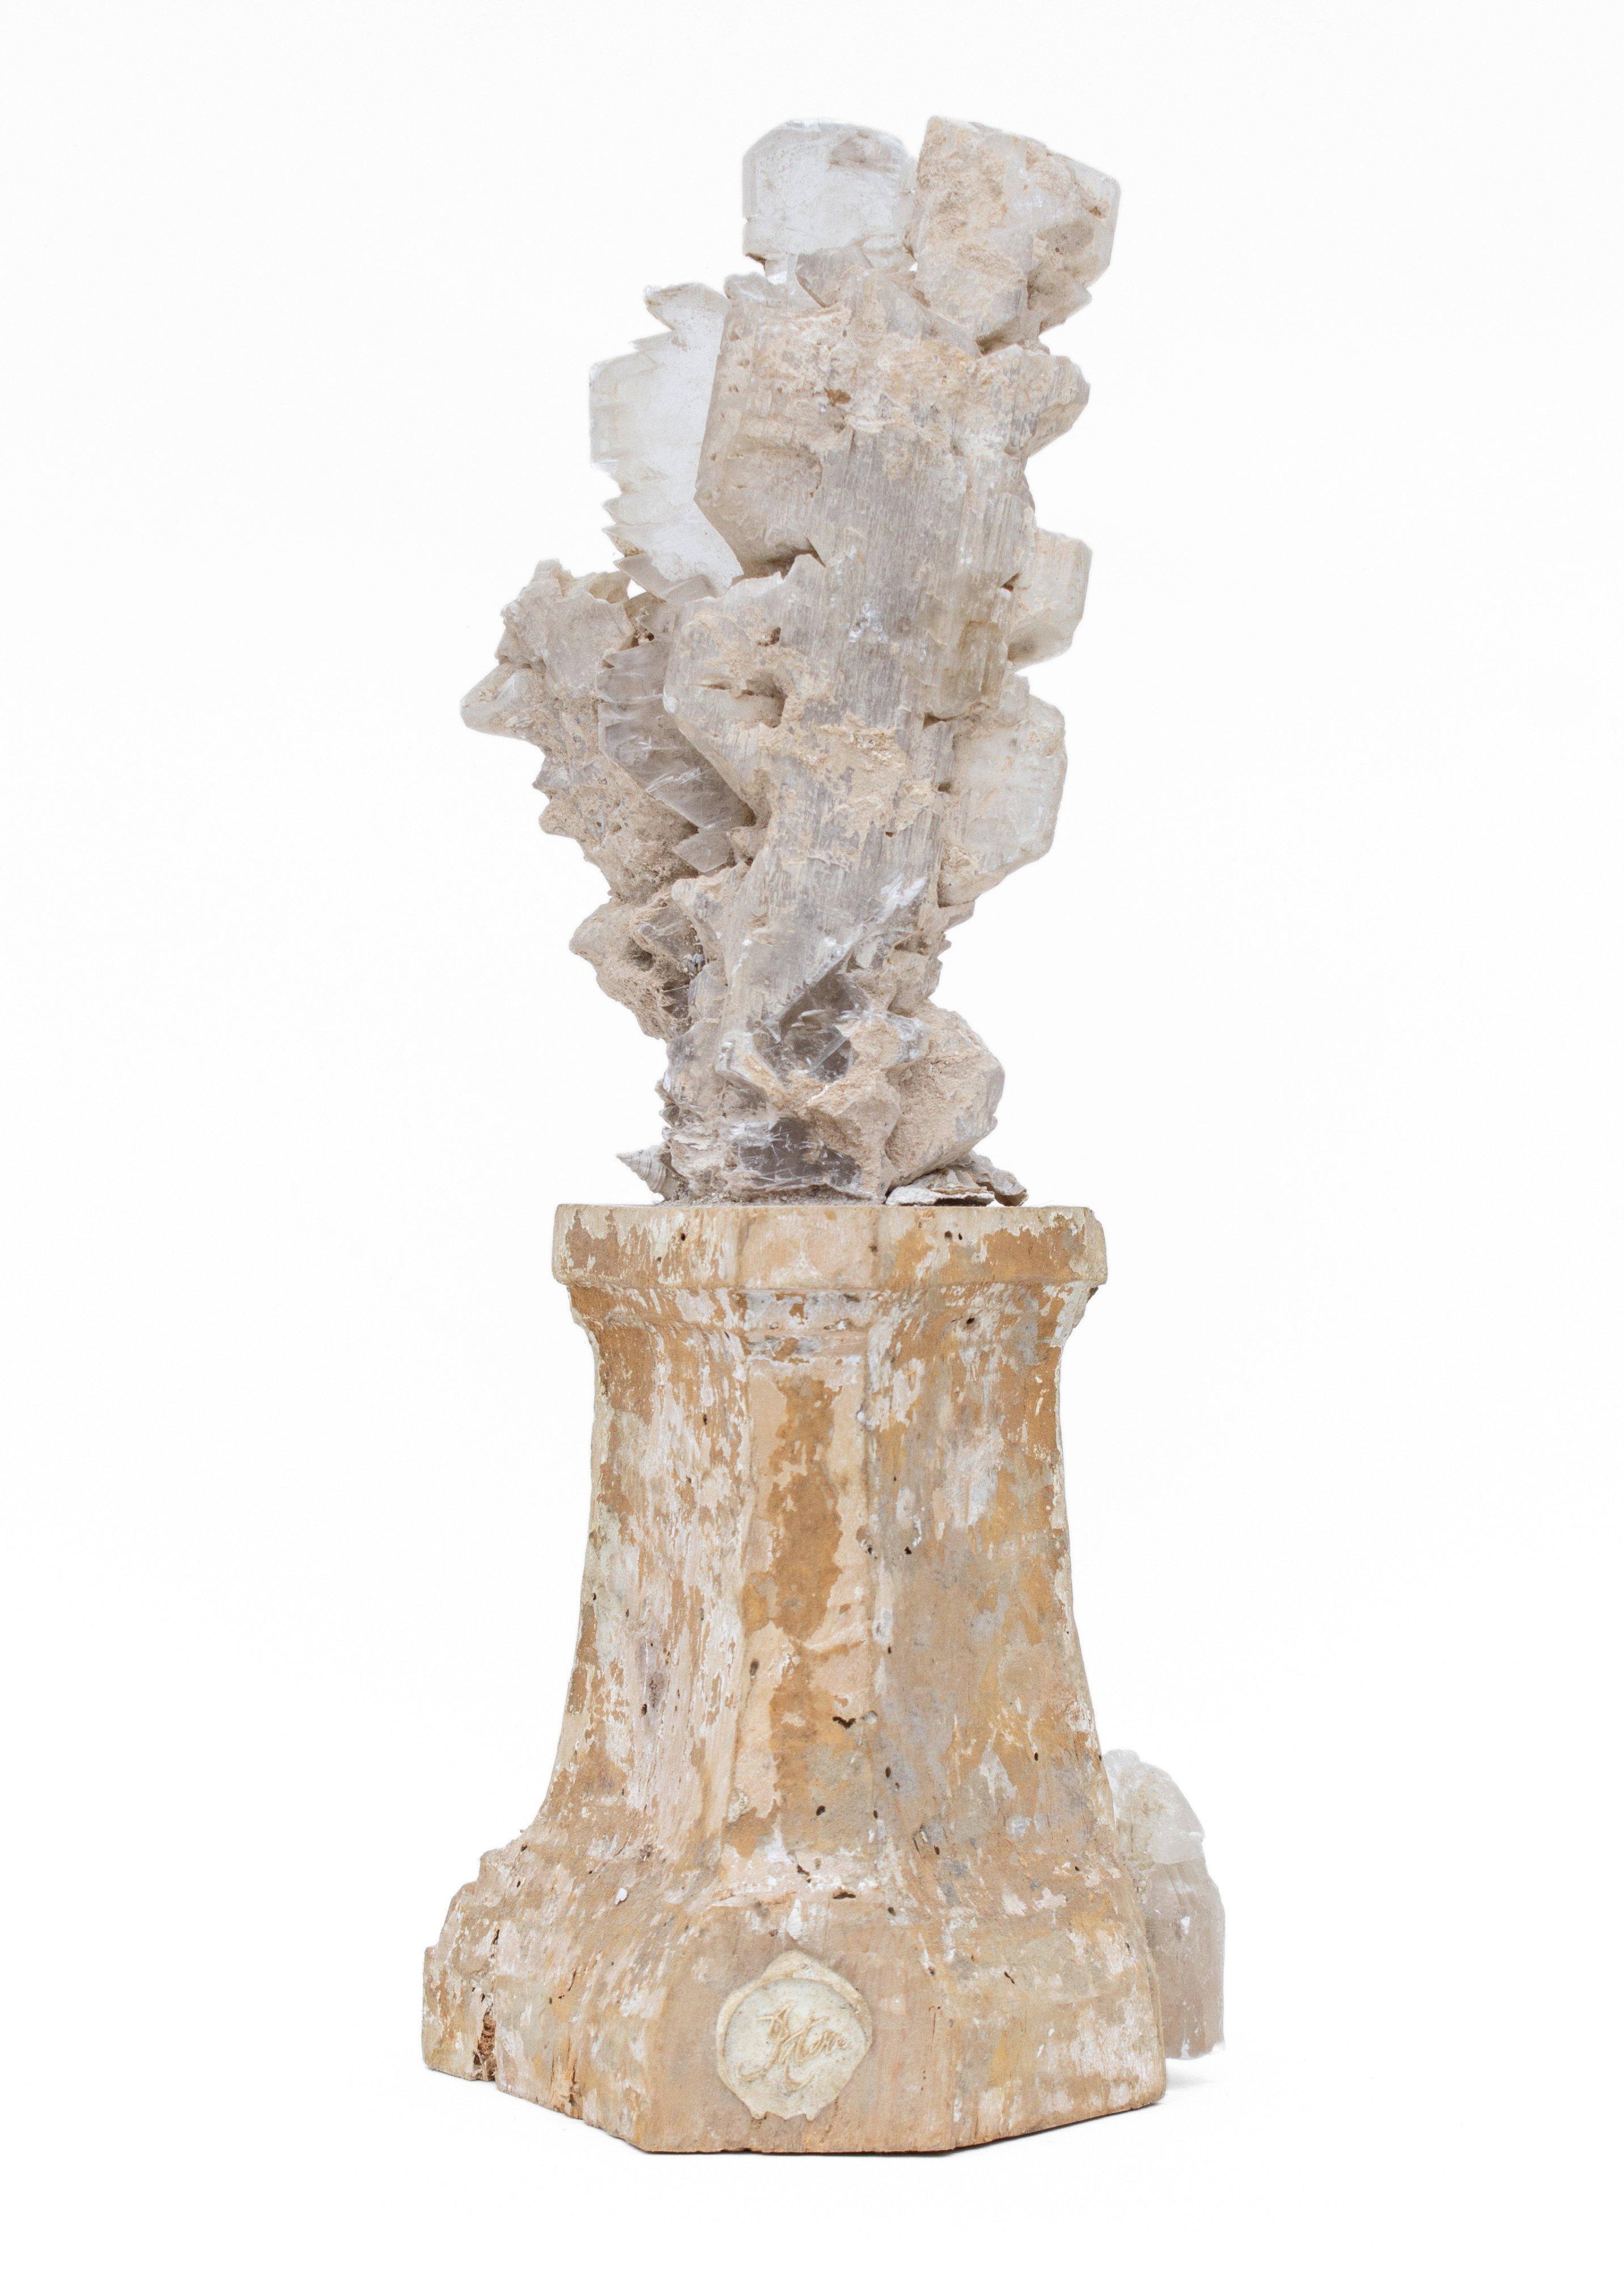 17th century Italian candlestick base decorated with a selenite blade cluster, fossil shells. This fragment is from a church in Florence. It was found and saved from the notorious flooding of the Arno River in 1966. 

The piece has been naturally